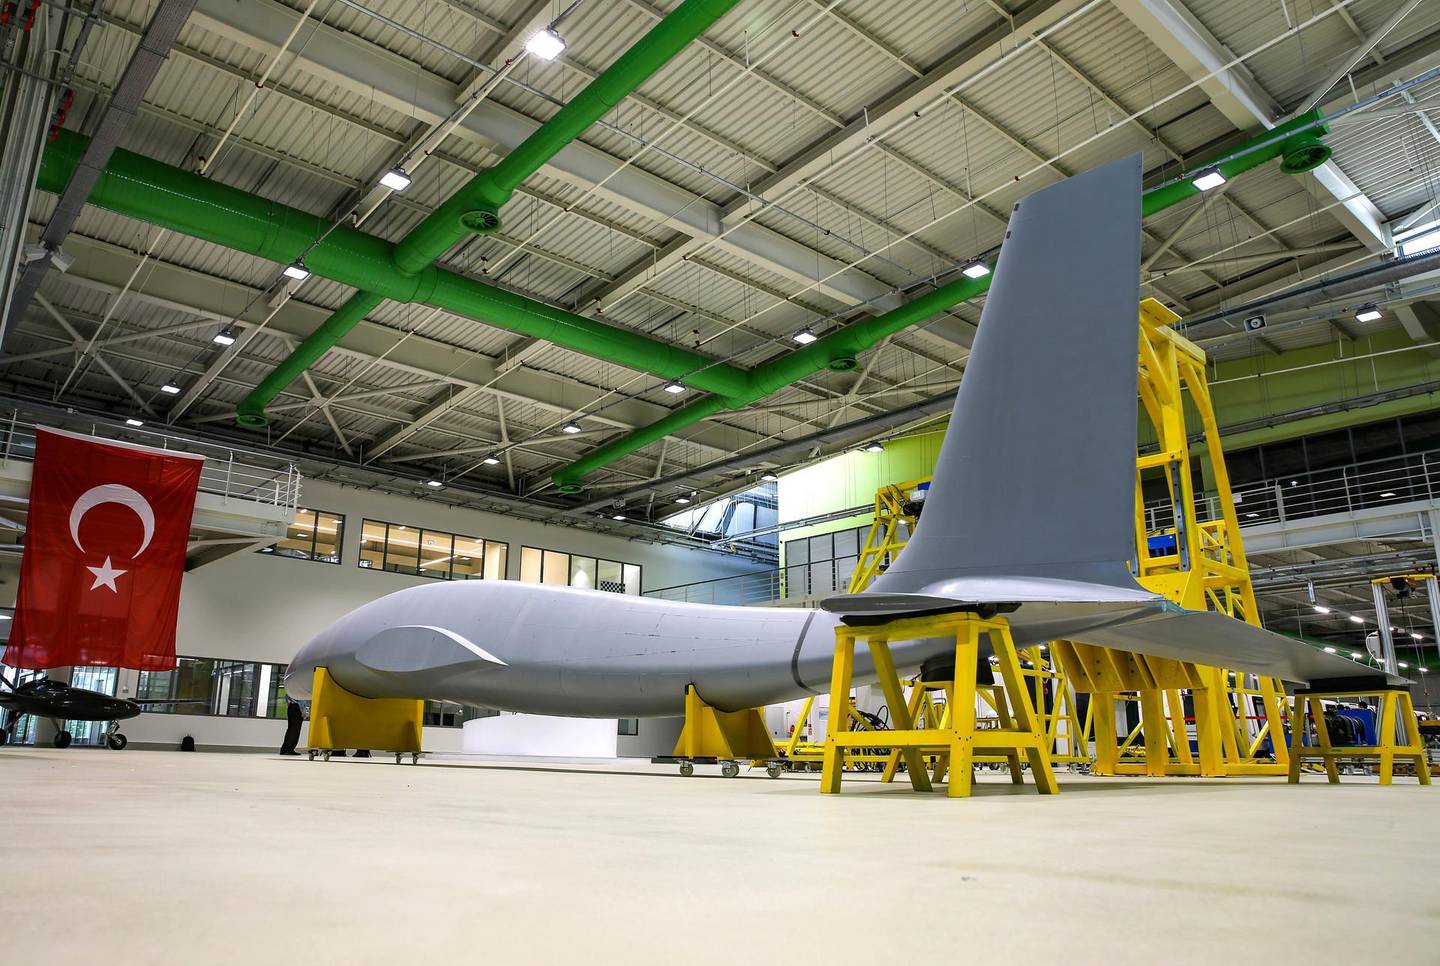 ISTANBUL, TURKEY - JUNE 13: The new heavy armed unmanned aerial vehicle (UAV), called combat drone 'Akinci' developed by Turkish unmanned aircraft producer Baykar Makina is seen on June 13, 2018 in Istanbul, Turkey. It is expected that Akinci will start to fly in the beginning of 2019. 
 (Photo by Salih Zeki Fazlioglu/Anadolu Agency/Getty Images)